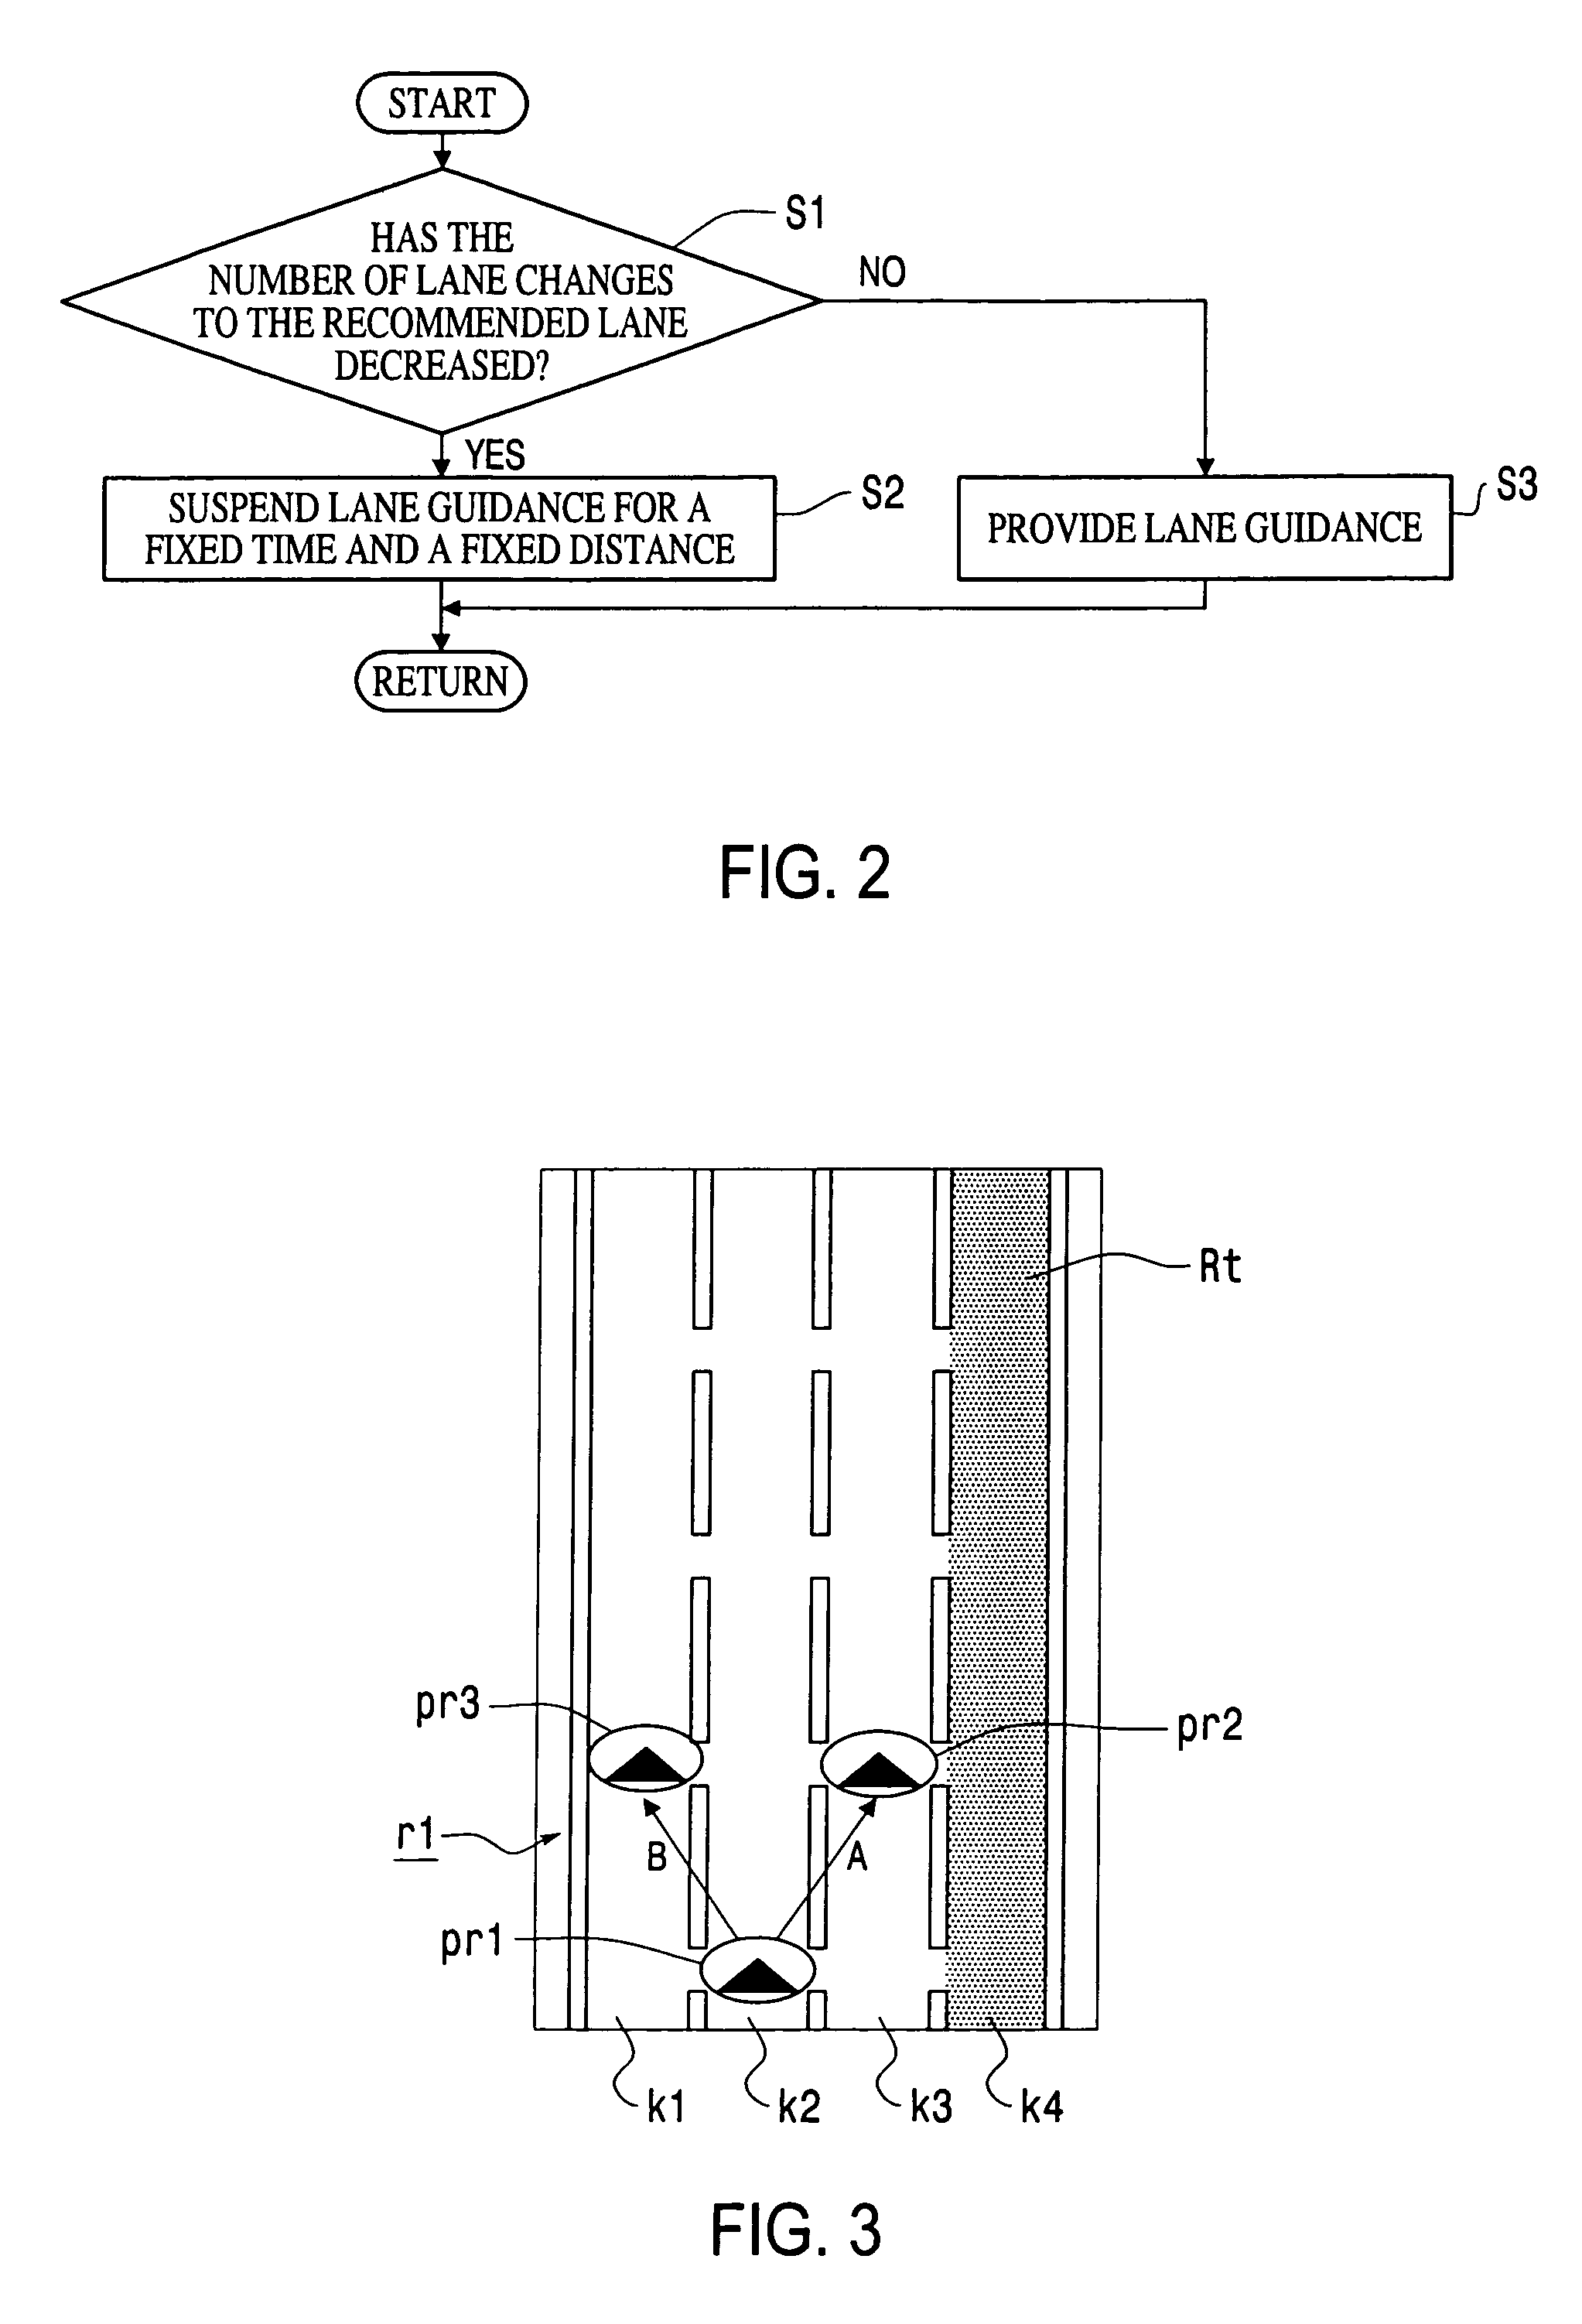 Route guidance systems, methods, and programs